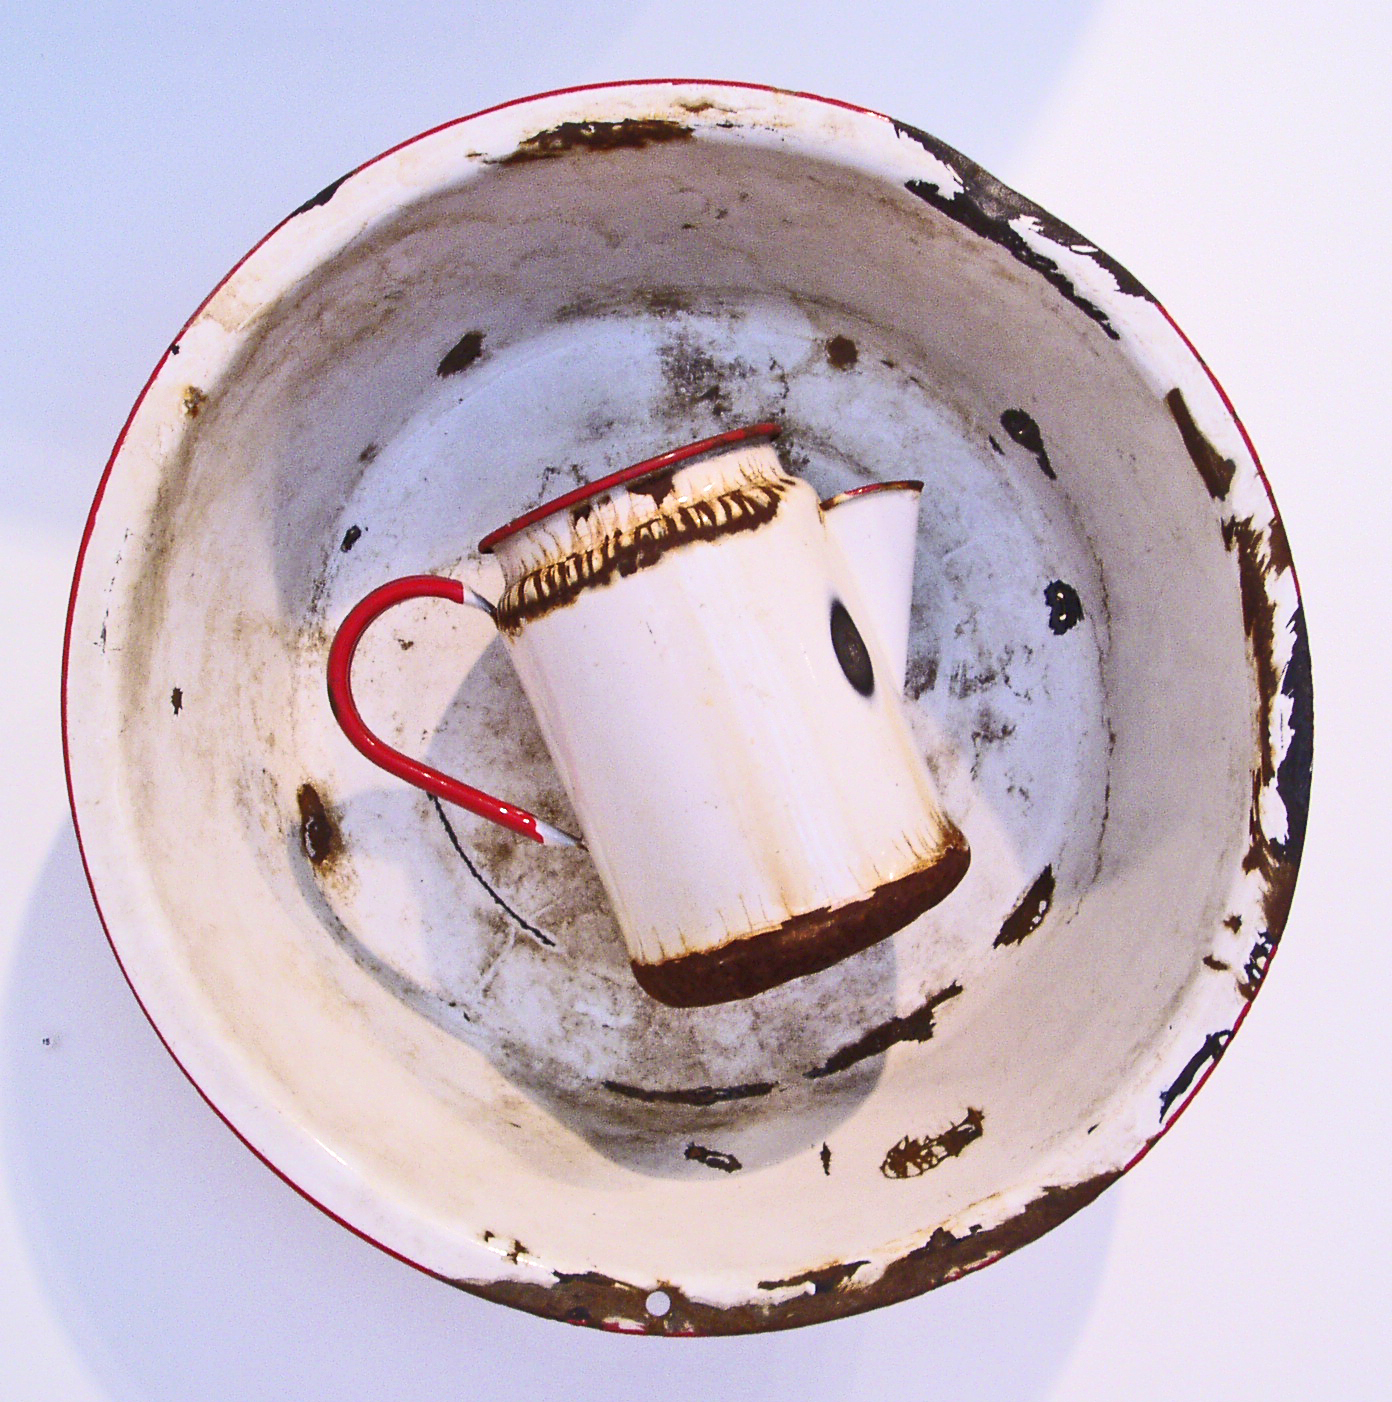 Photograph of a old and rusted white pan an pitcher with red rims.